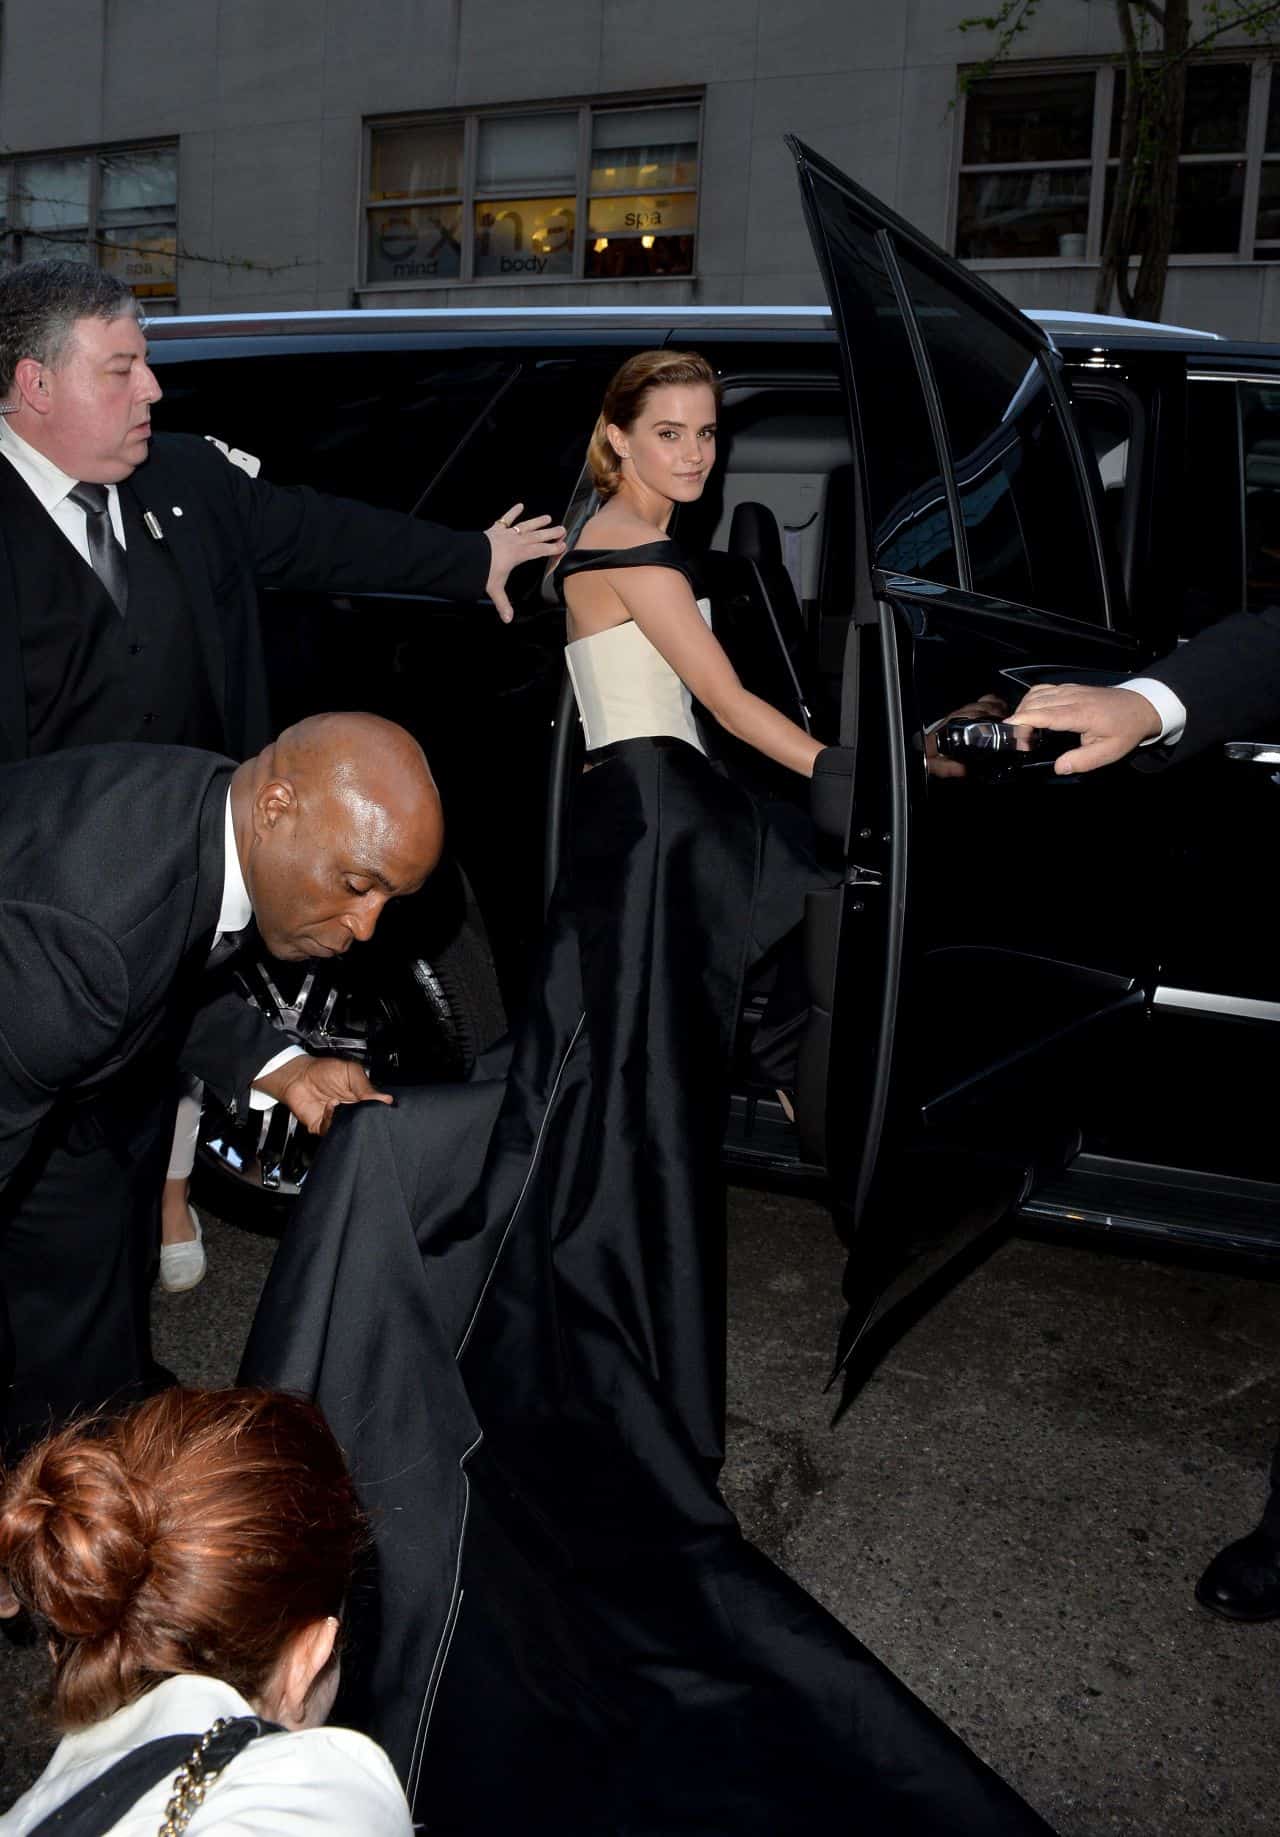 Emma Watson Was a Sensation in an Elegant Skirt and Corset at the Met Gala